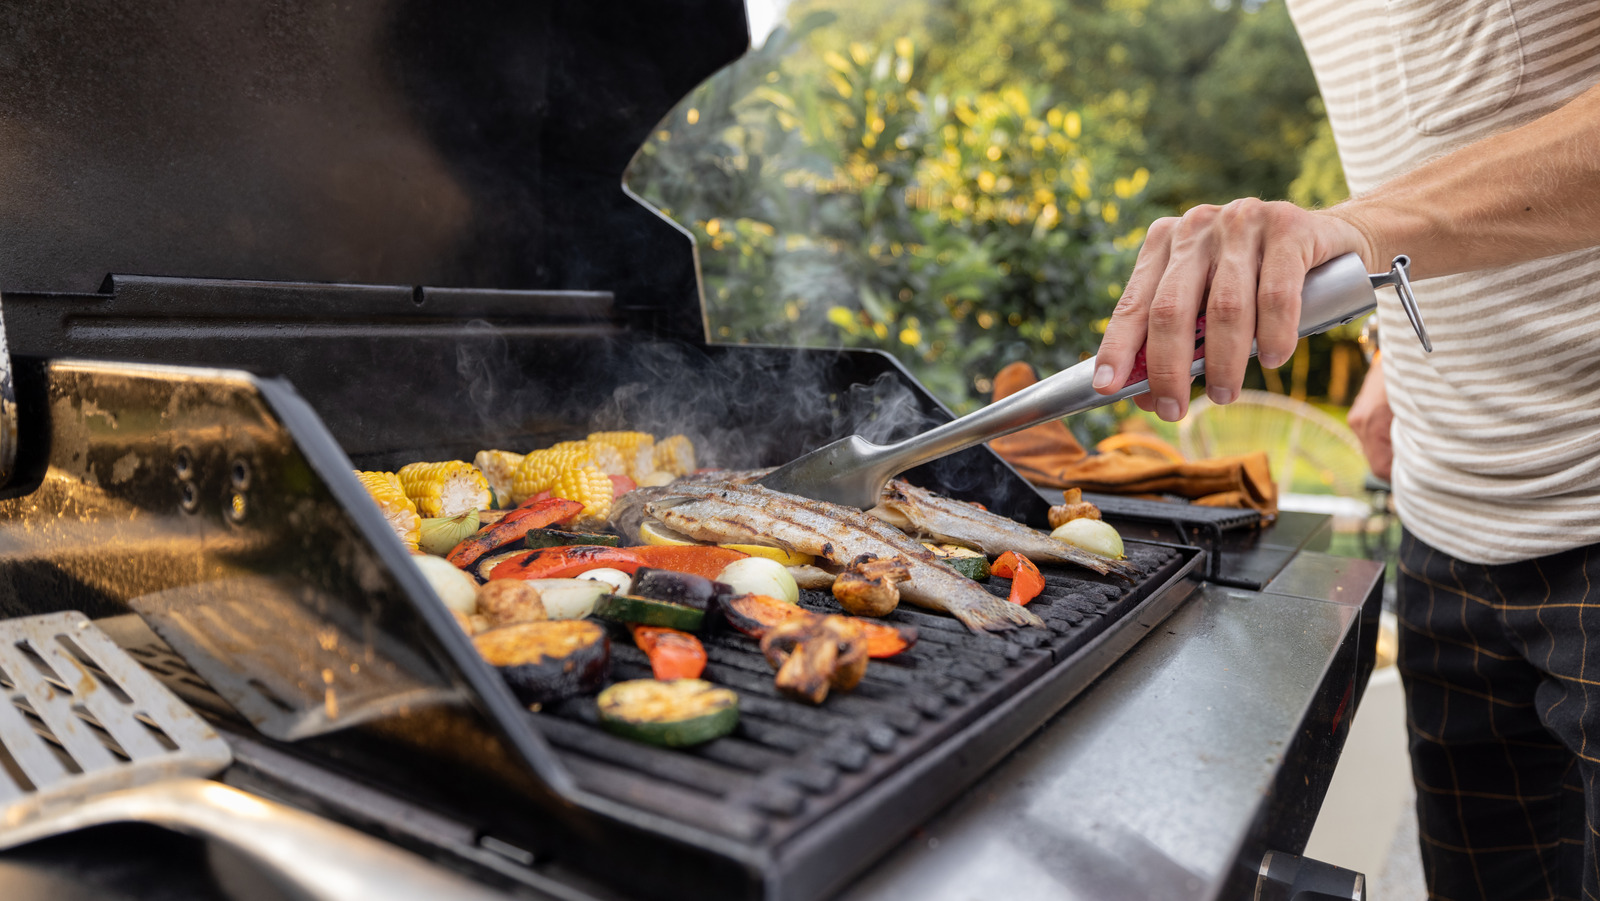 What Are The Best Foods To Cook On Grill?